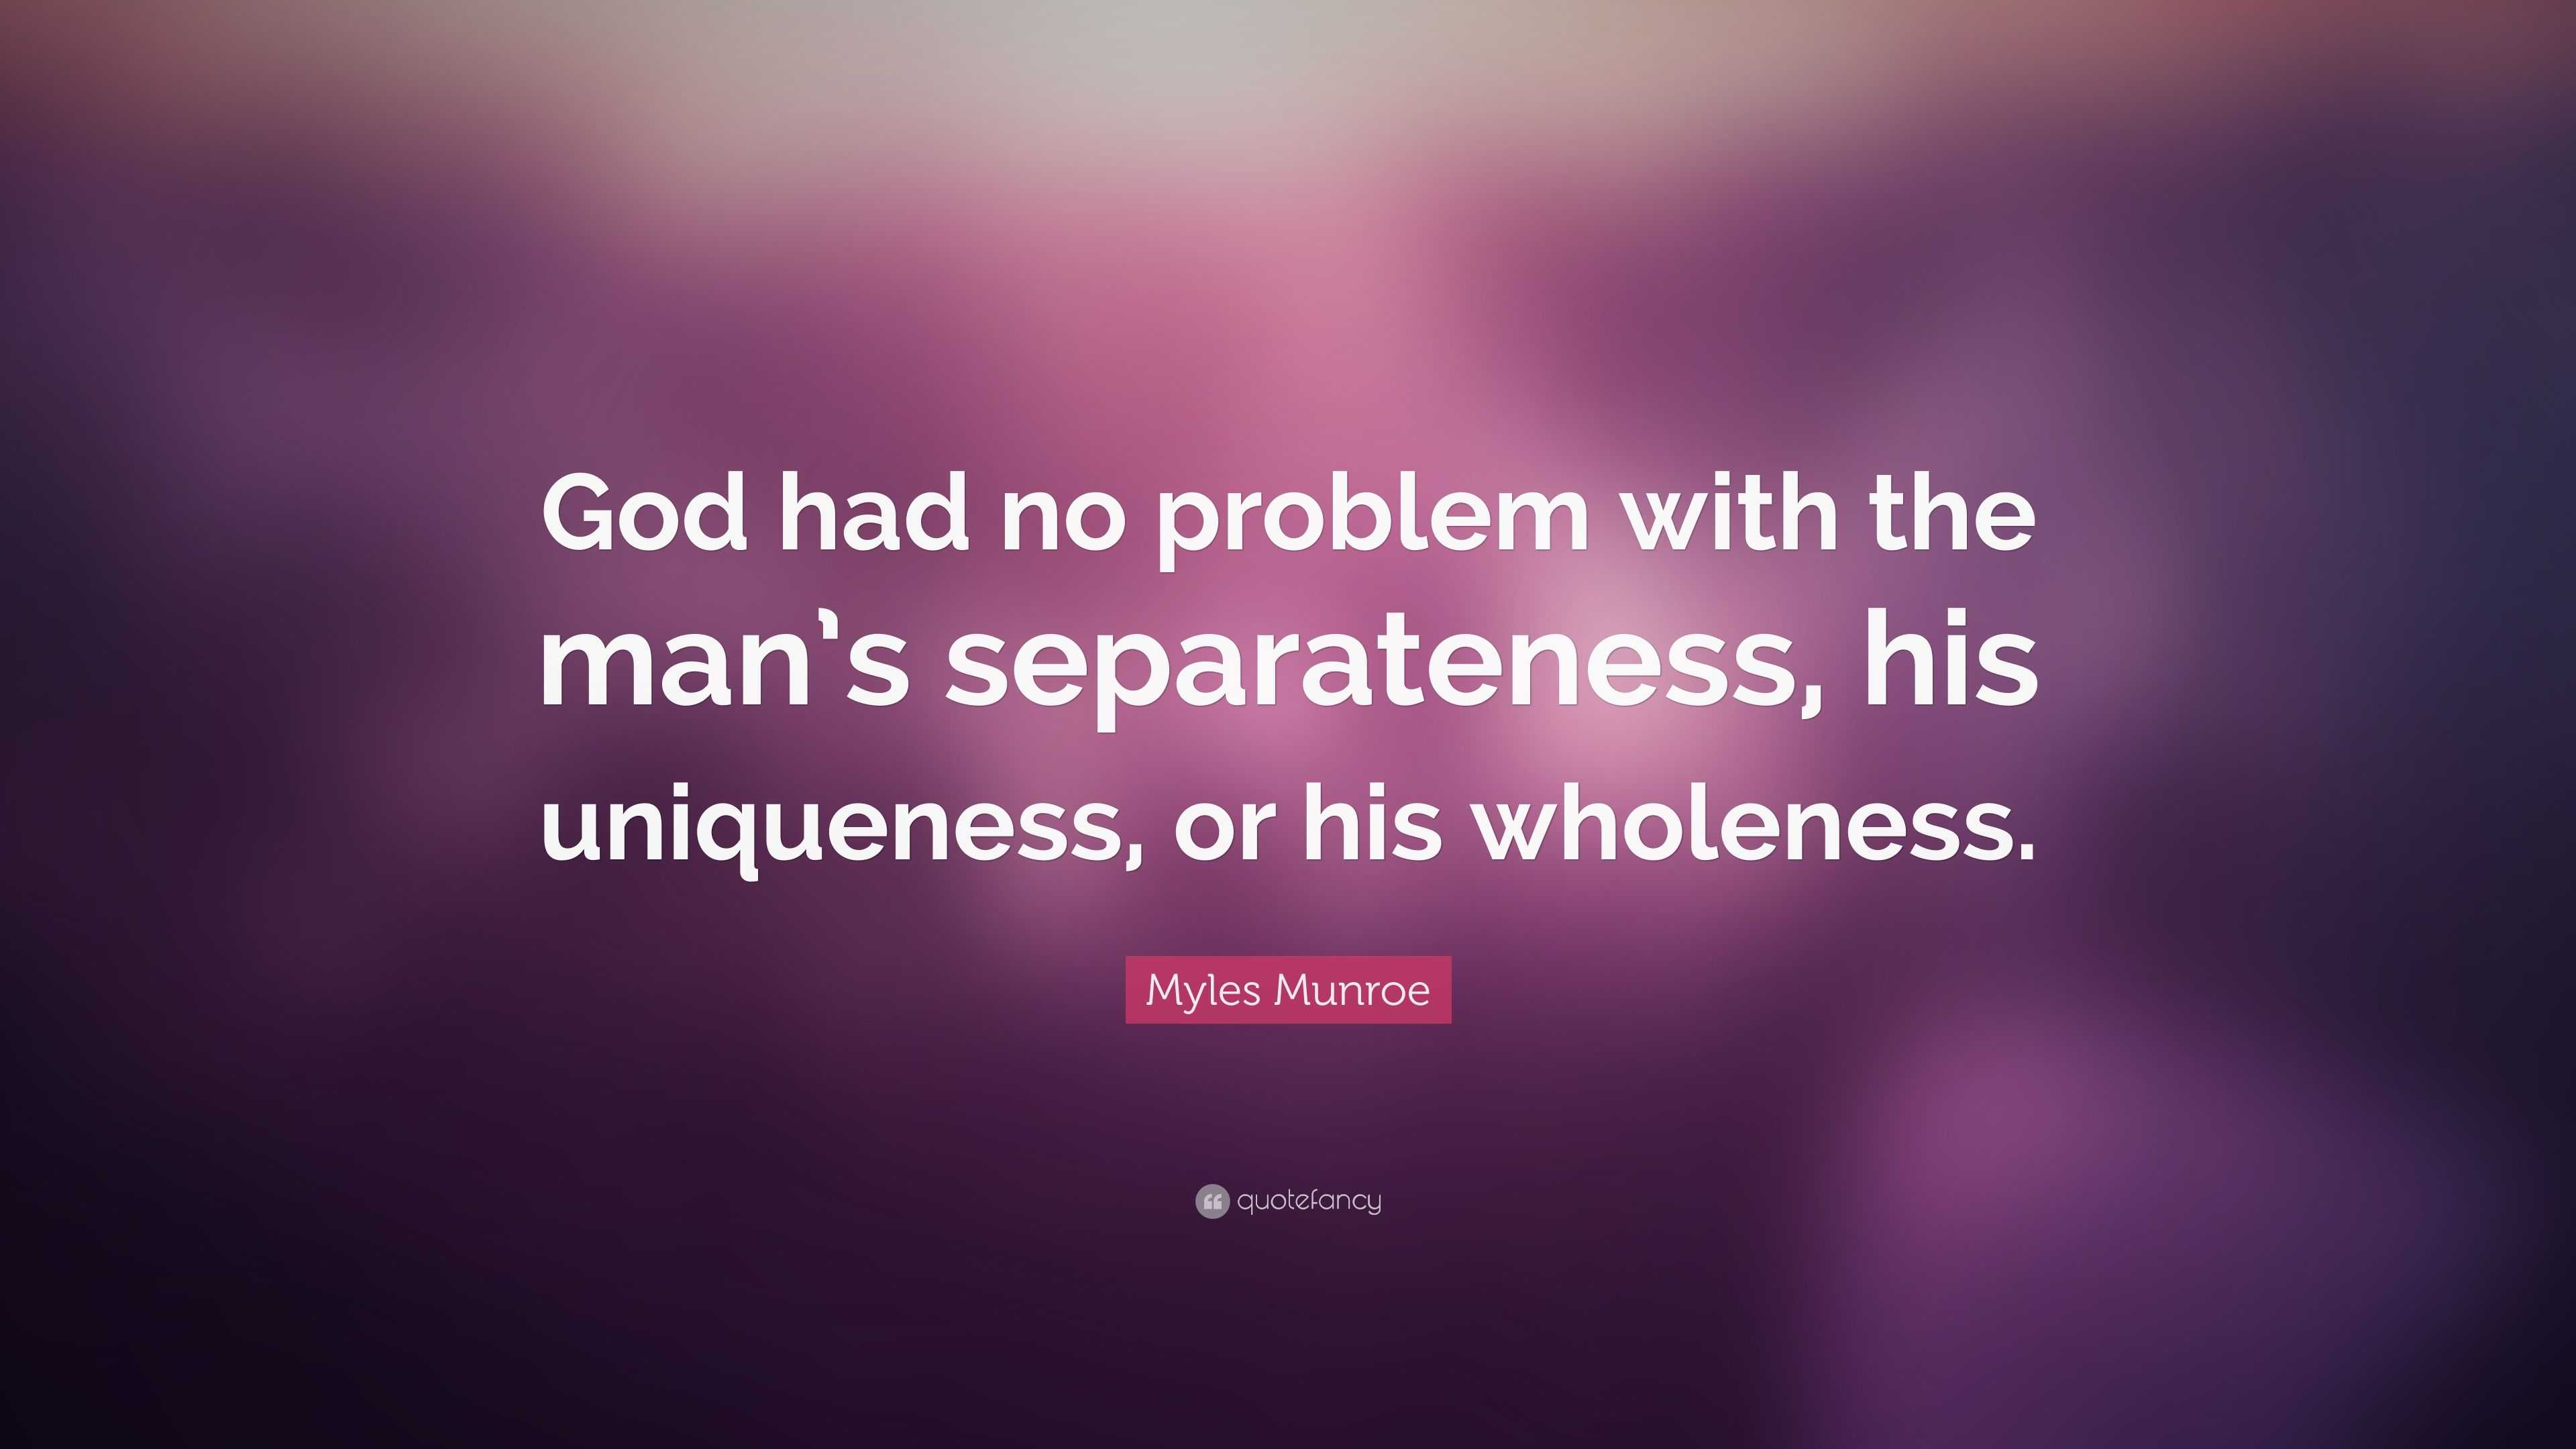 Myles Munroe Quote: “God had no problem with the man’s separateness ...